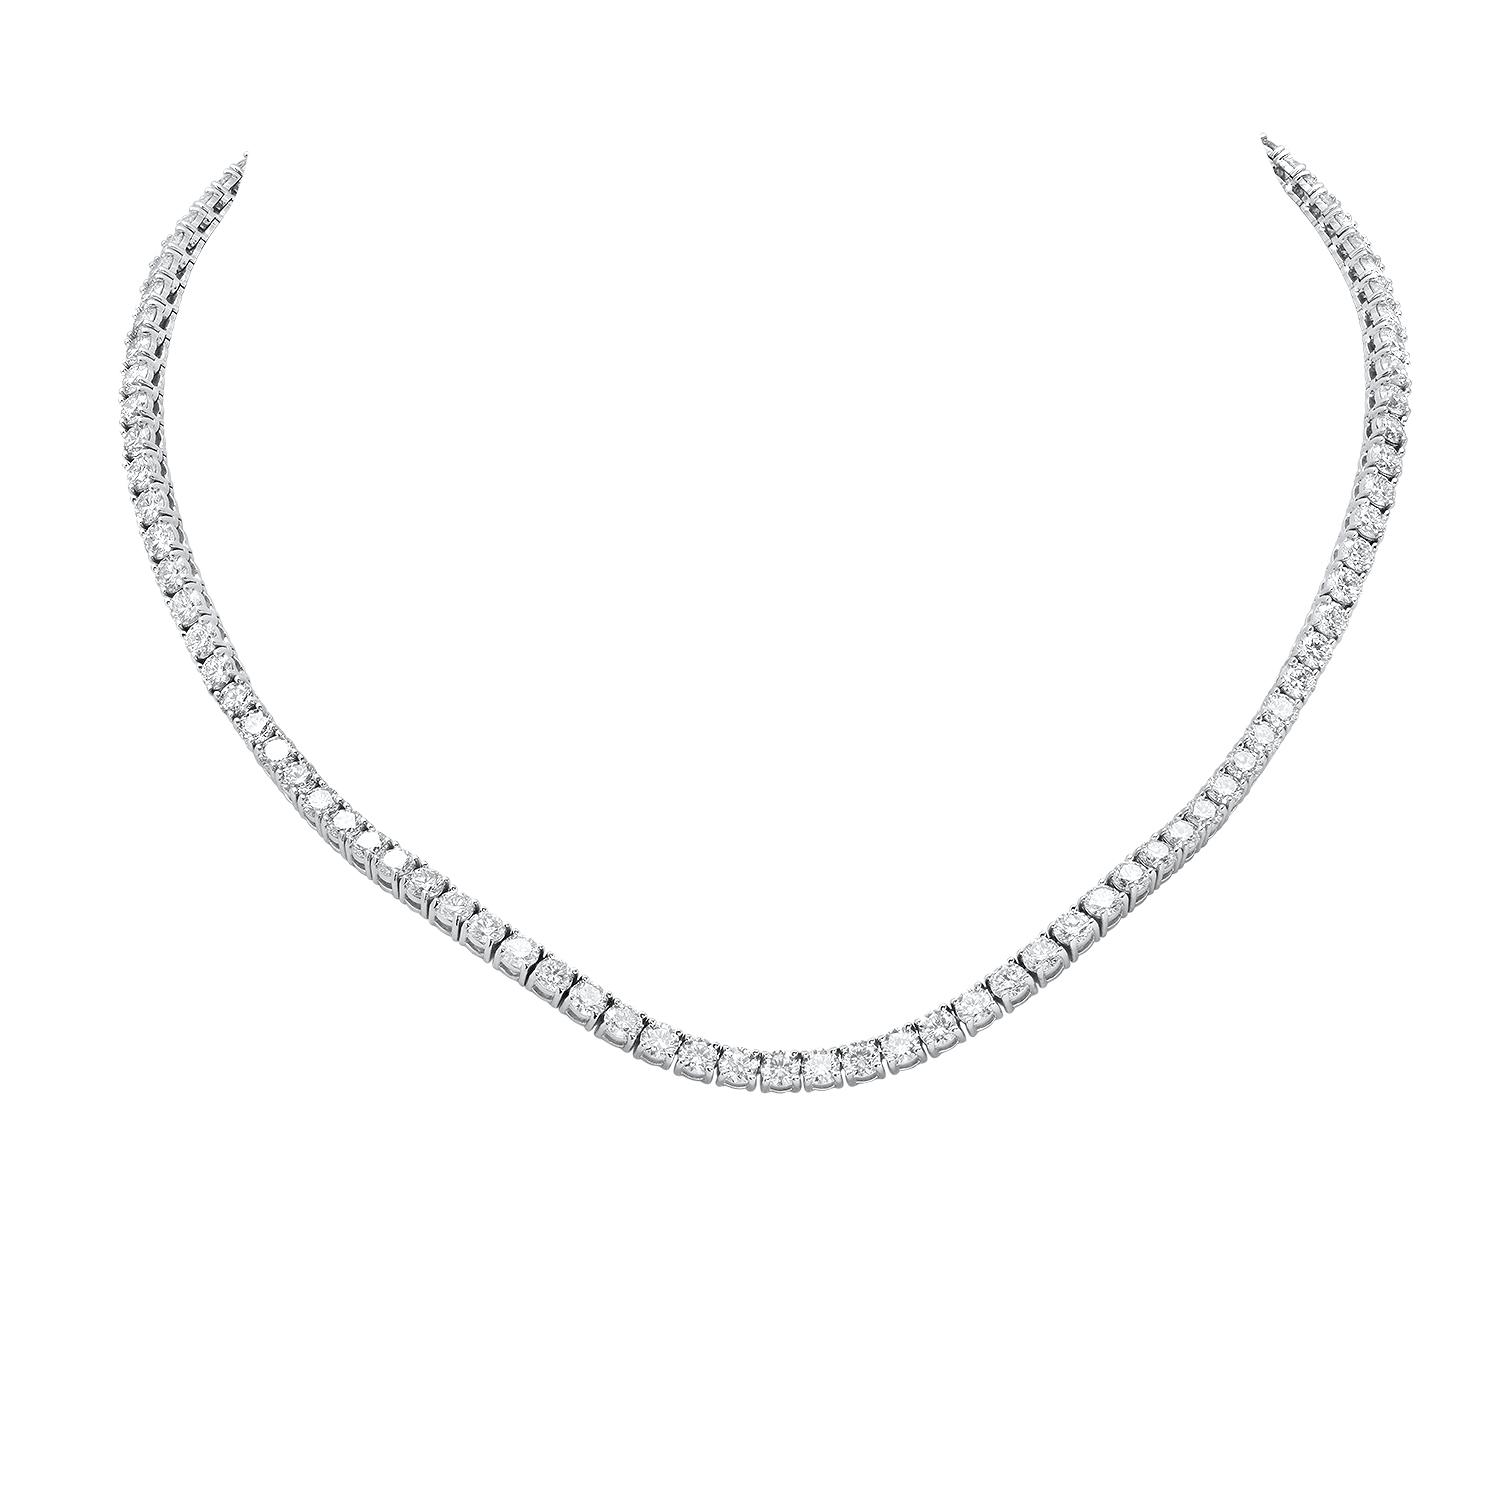 18K White Gold and 21.75ct Diamond Necklace